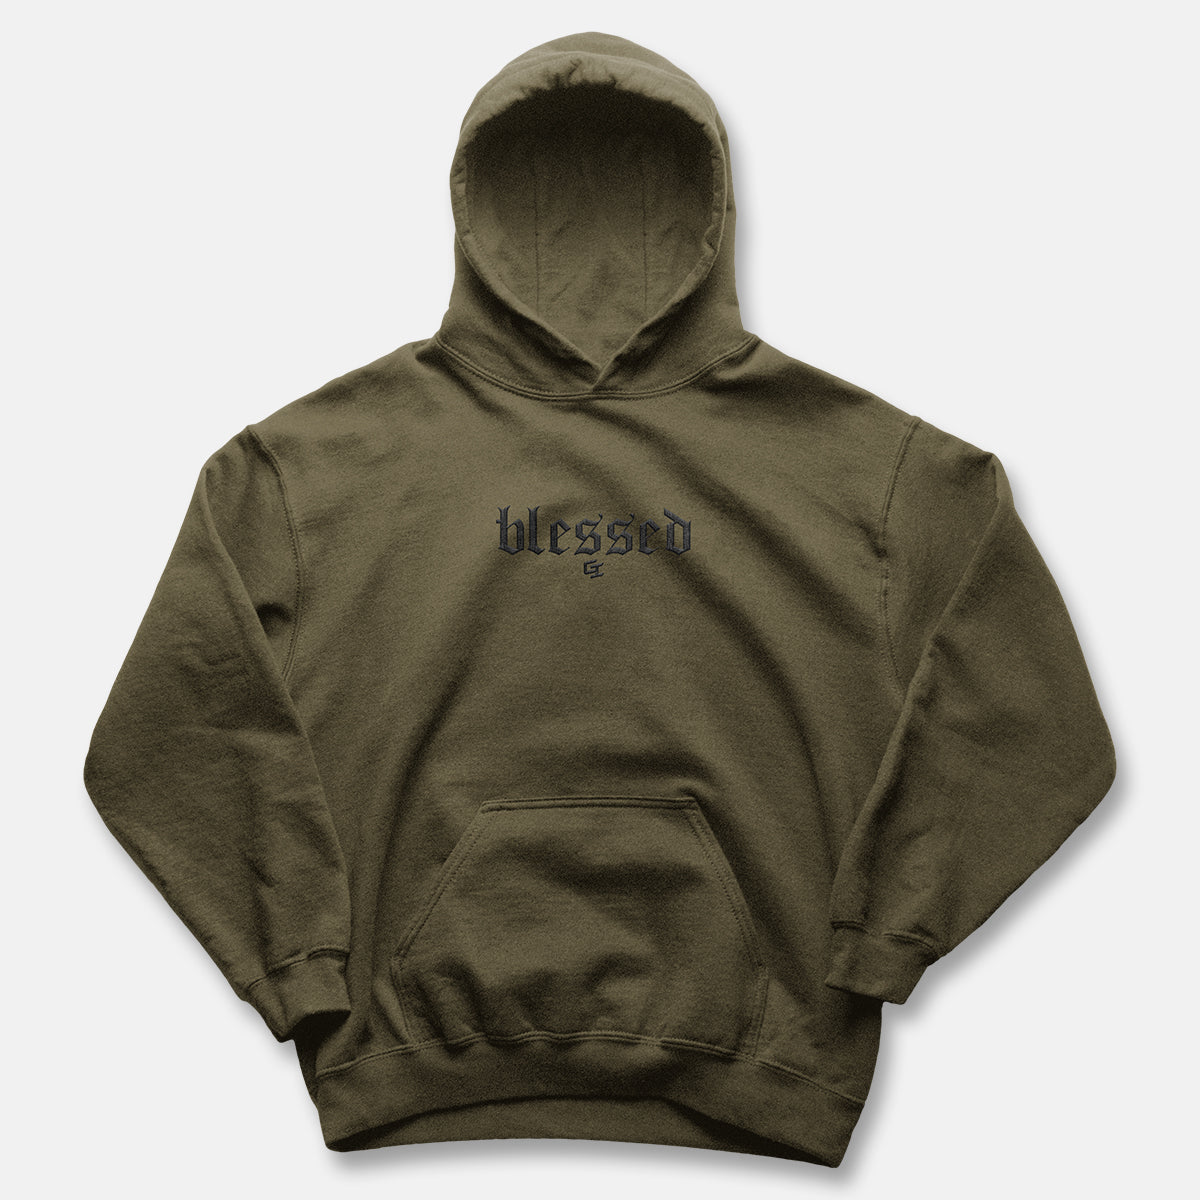 [Limited Edition] Epiphany 'Blessed' Hoodie (Embroidered)